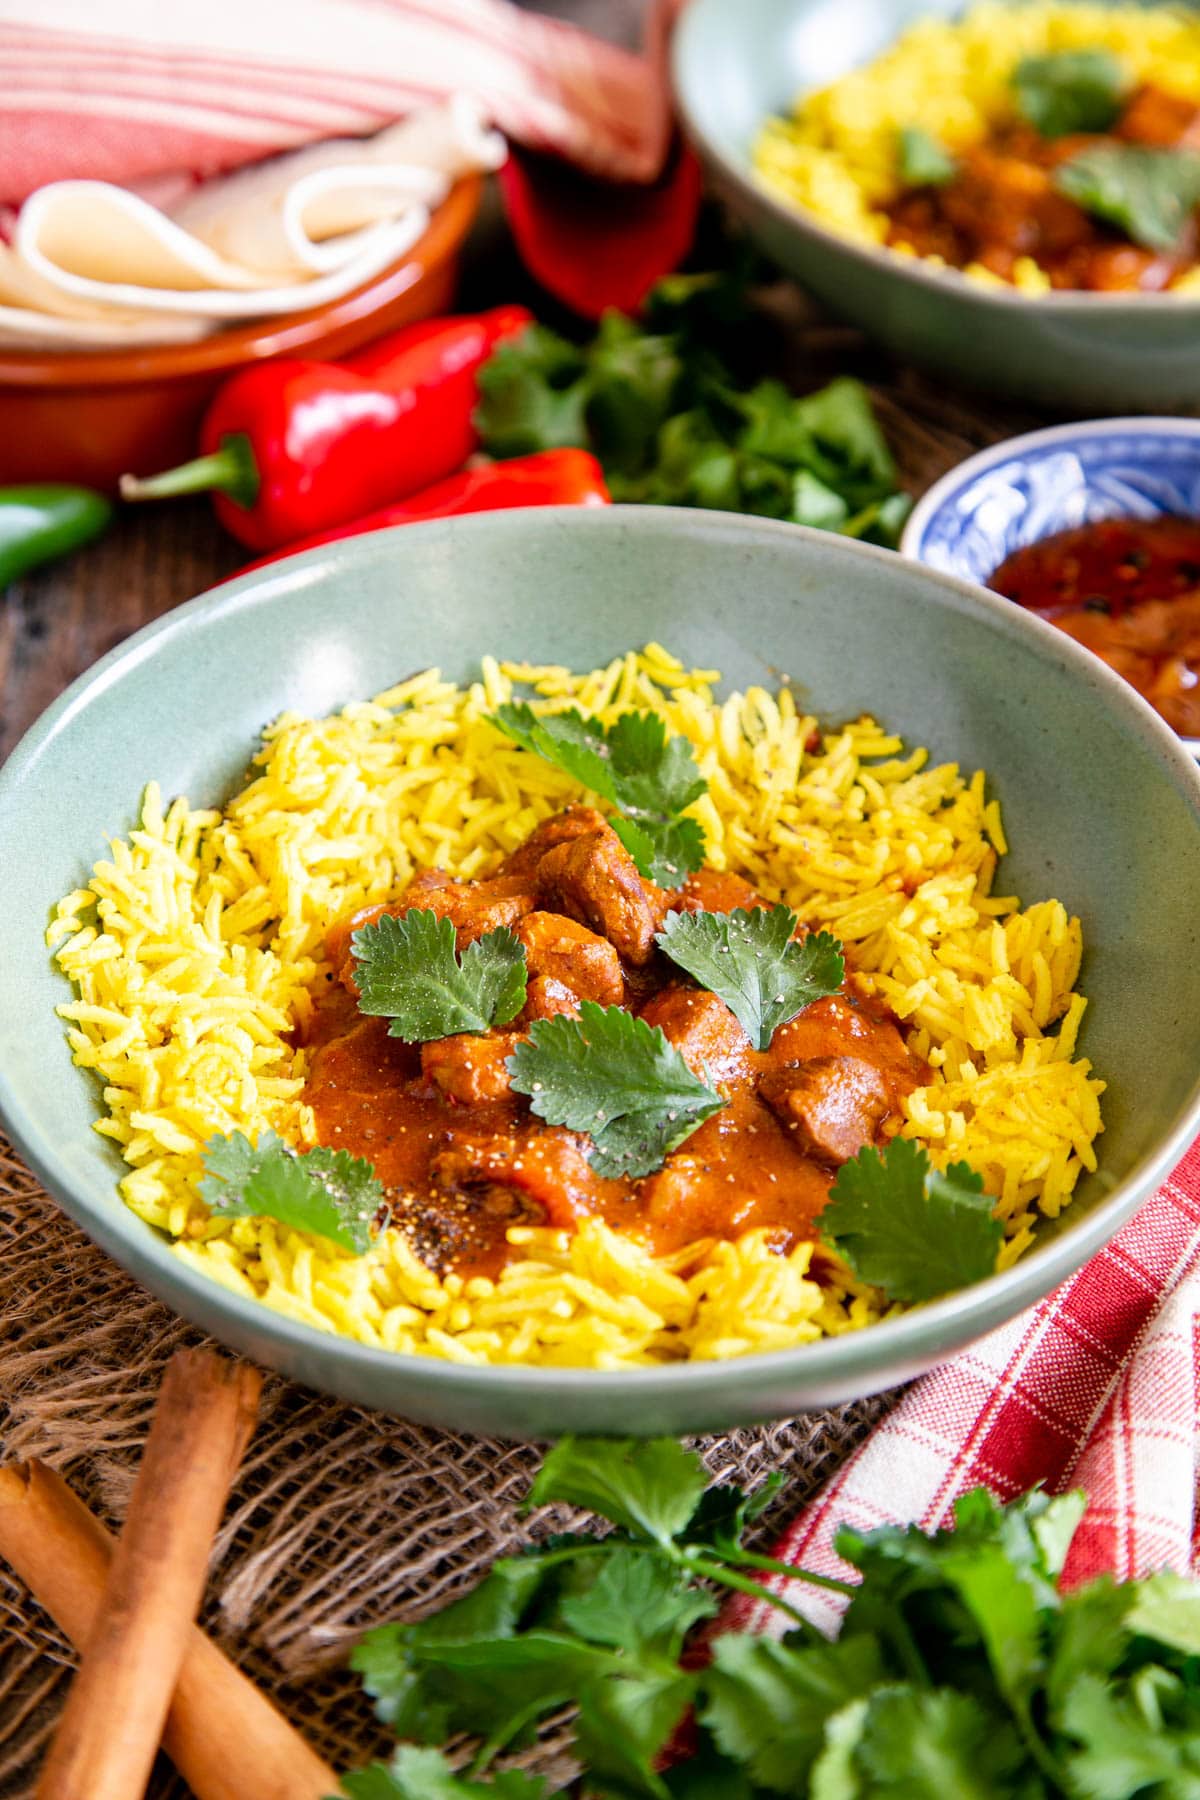 Slow cooker lamb curry, served in a green bowl with bright yellow pilau rice, garnished with coriander leaves. More coriander, cinnamon sticks, flatbreads, and chutney surround the bowl.